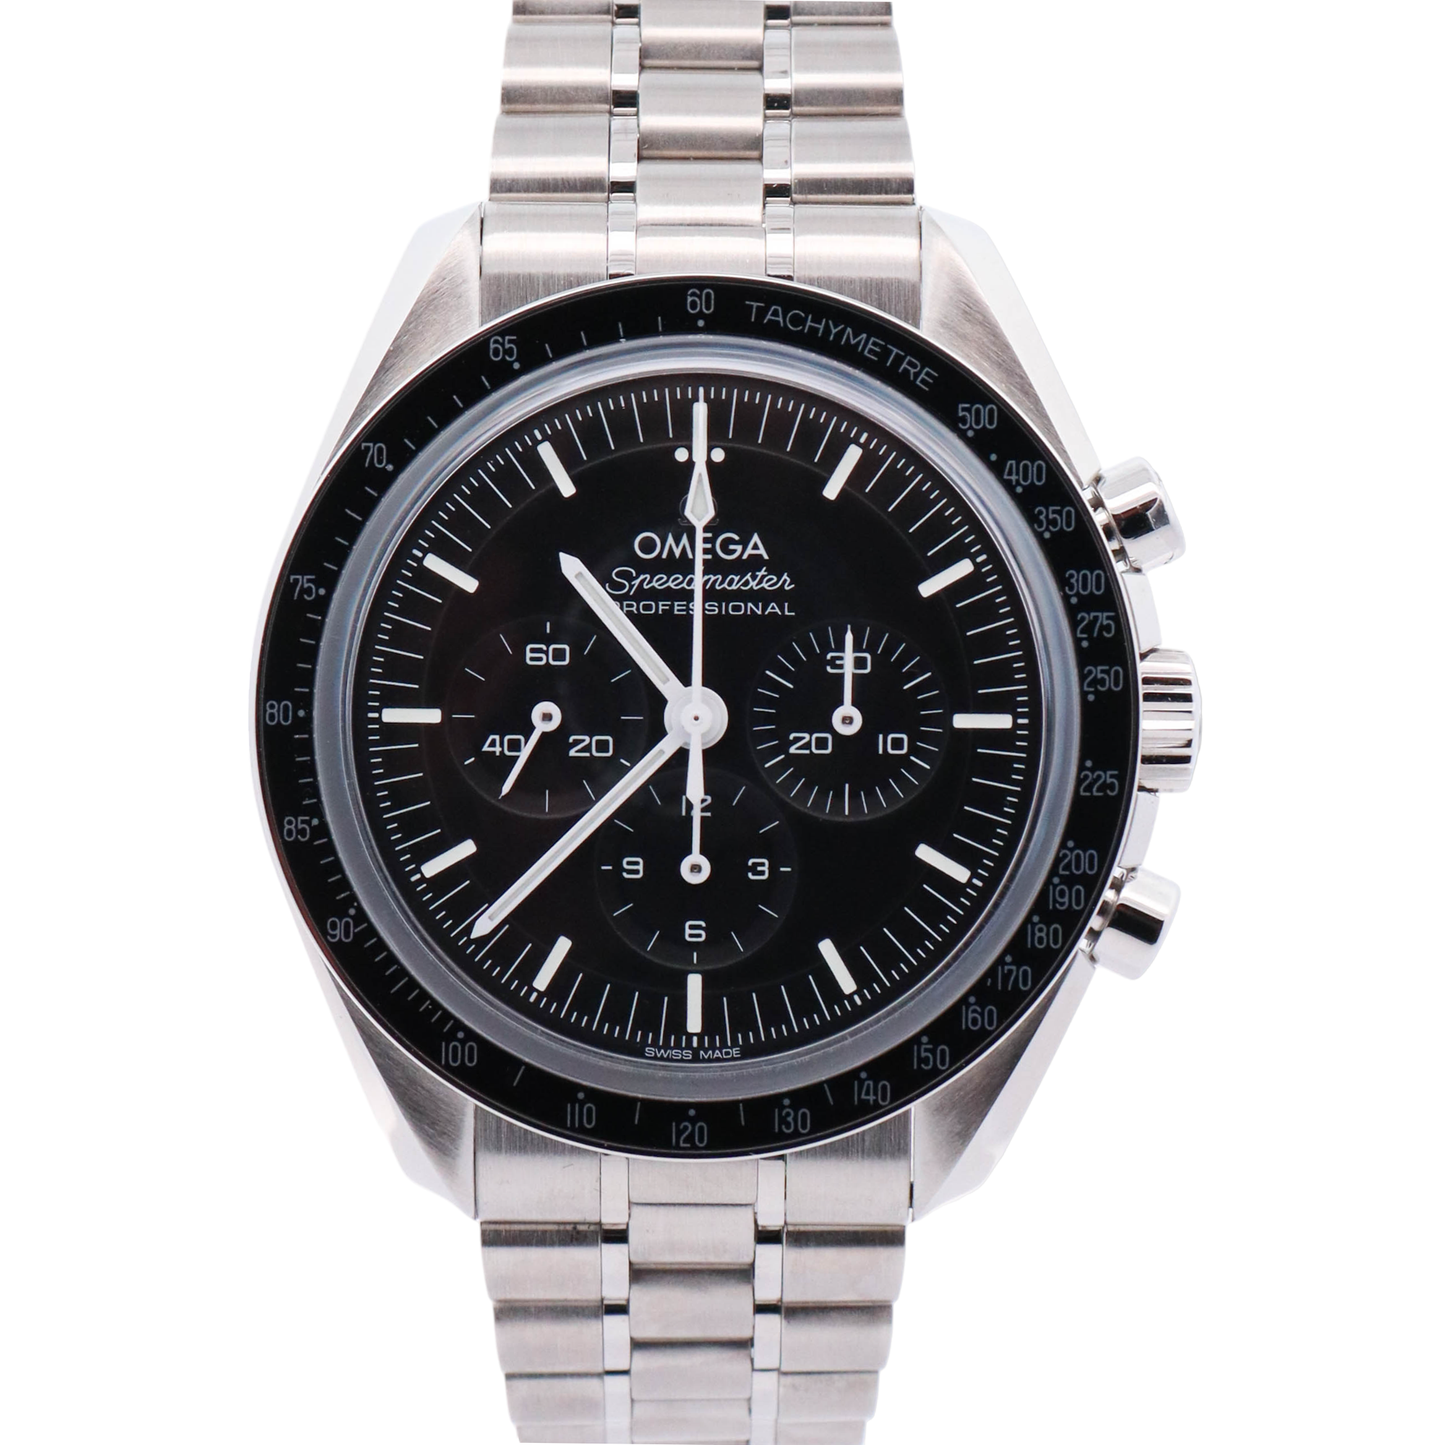 Omega Speedmaster Professional Stainless Steel 42mm Black Chronograph Dial Watch Reference# 310.30.42.50.01.002 - Happy Jewelers Fine Jewelry Lifetime Warranty